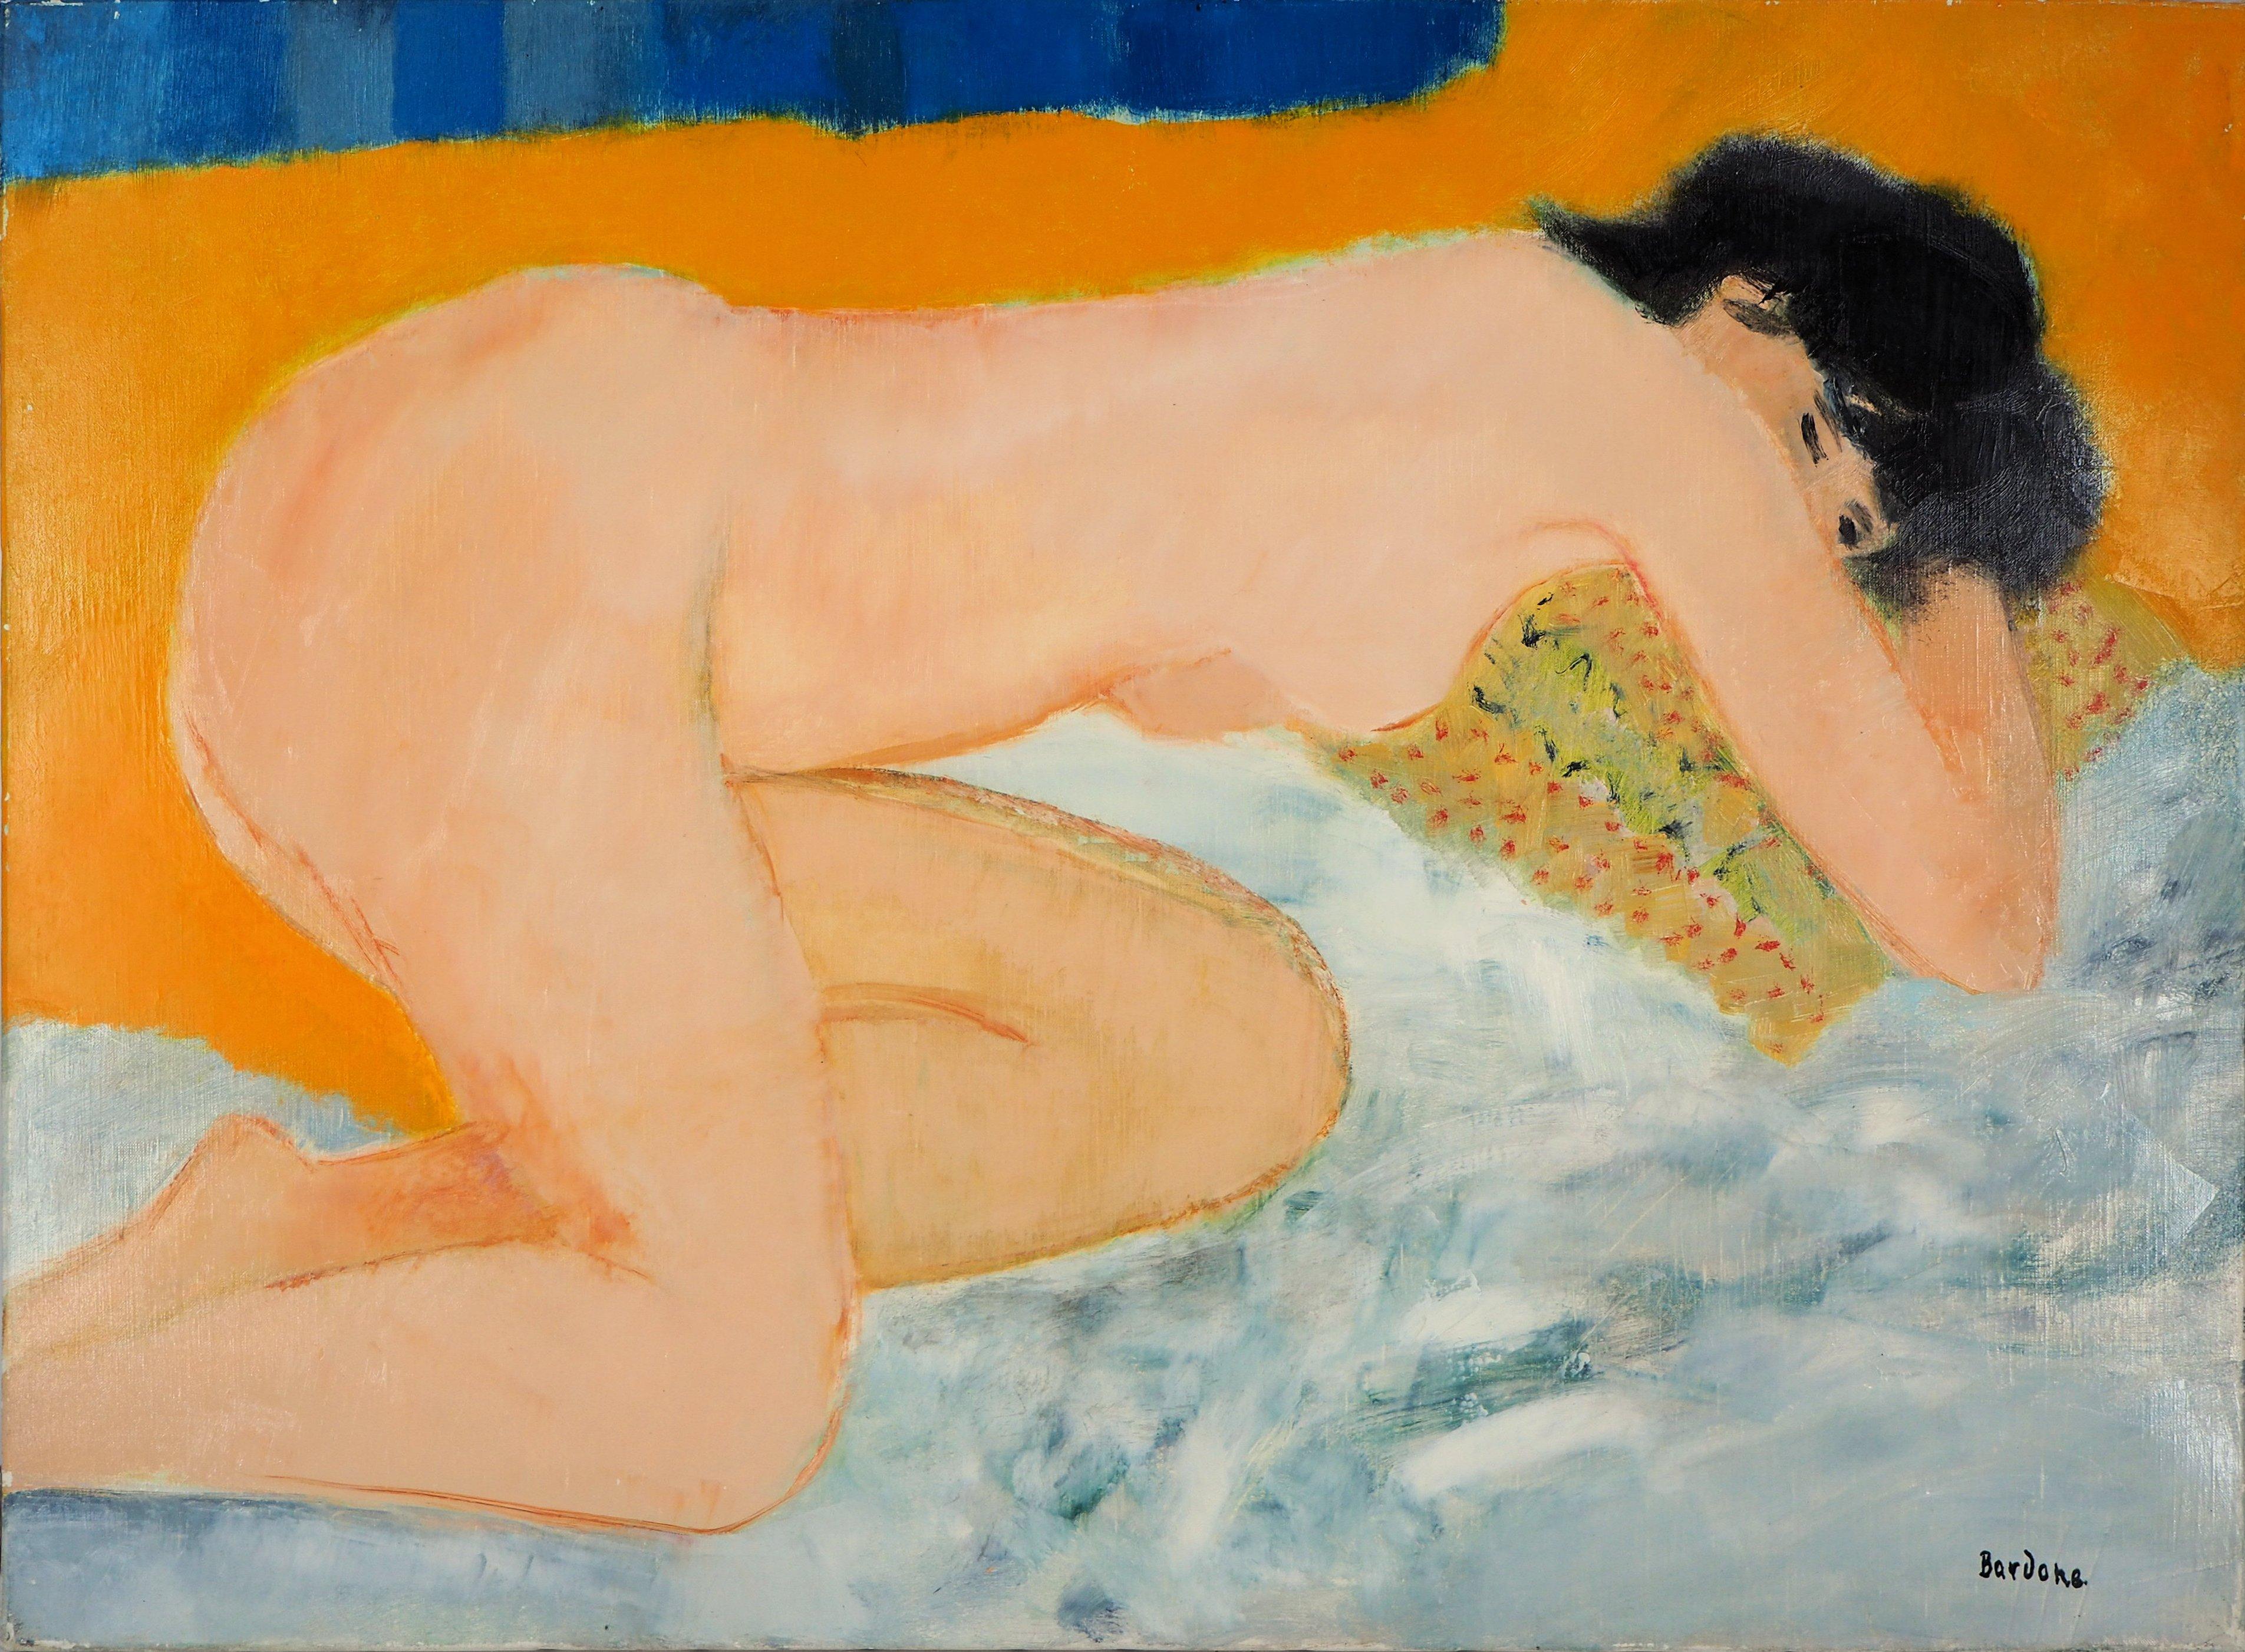 Guy Bardone Nude Painting - Interior : Nude Asleep on a Yellow Pillow - Original Oil on Canvas, Handsigned